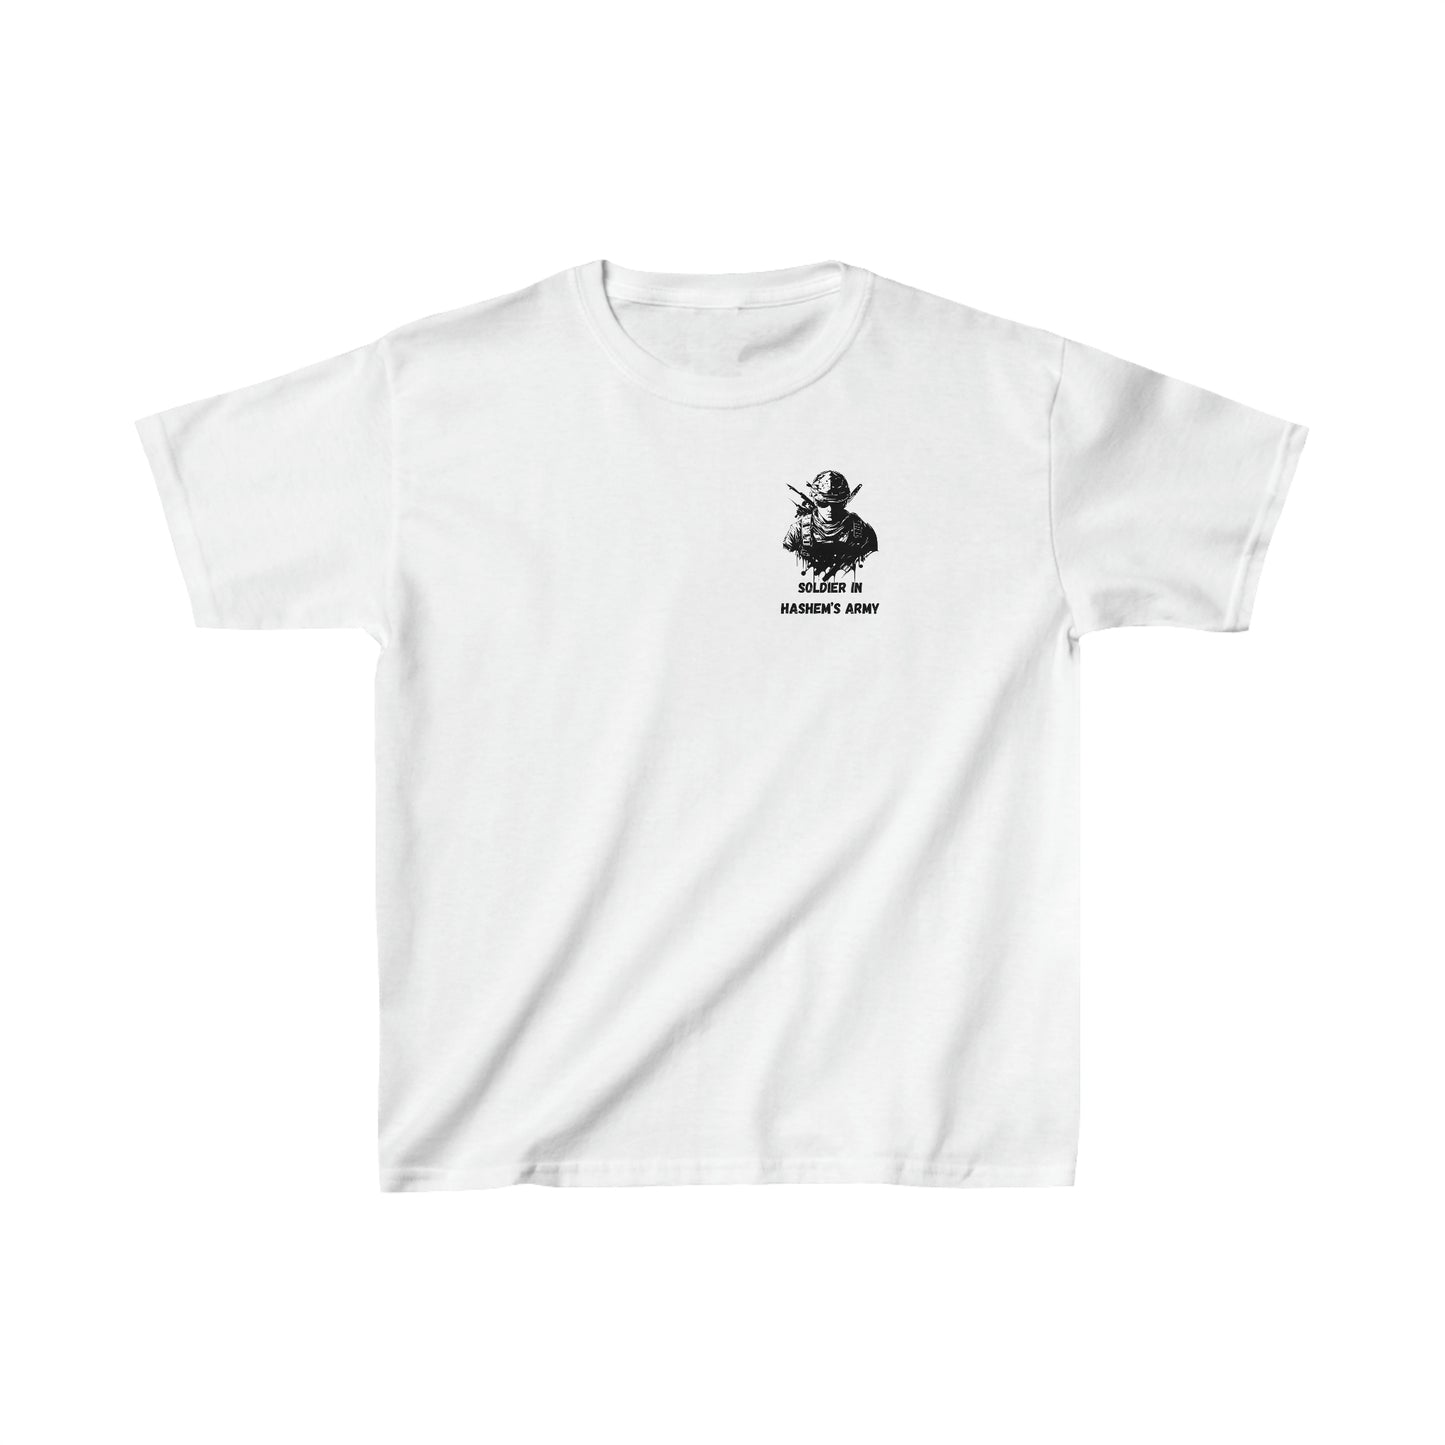 Boys' Soldier in Hashem's Army small image short sleeve t-shirt